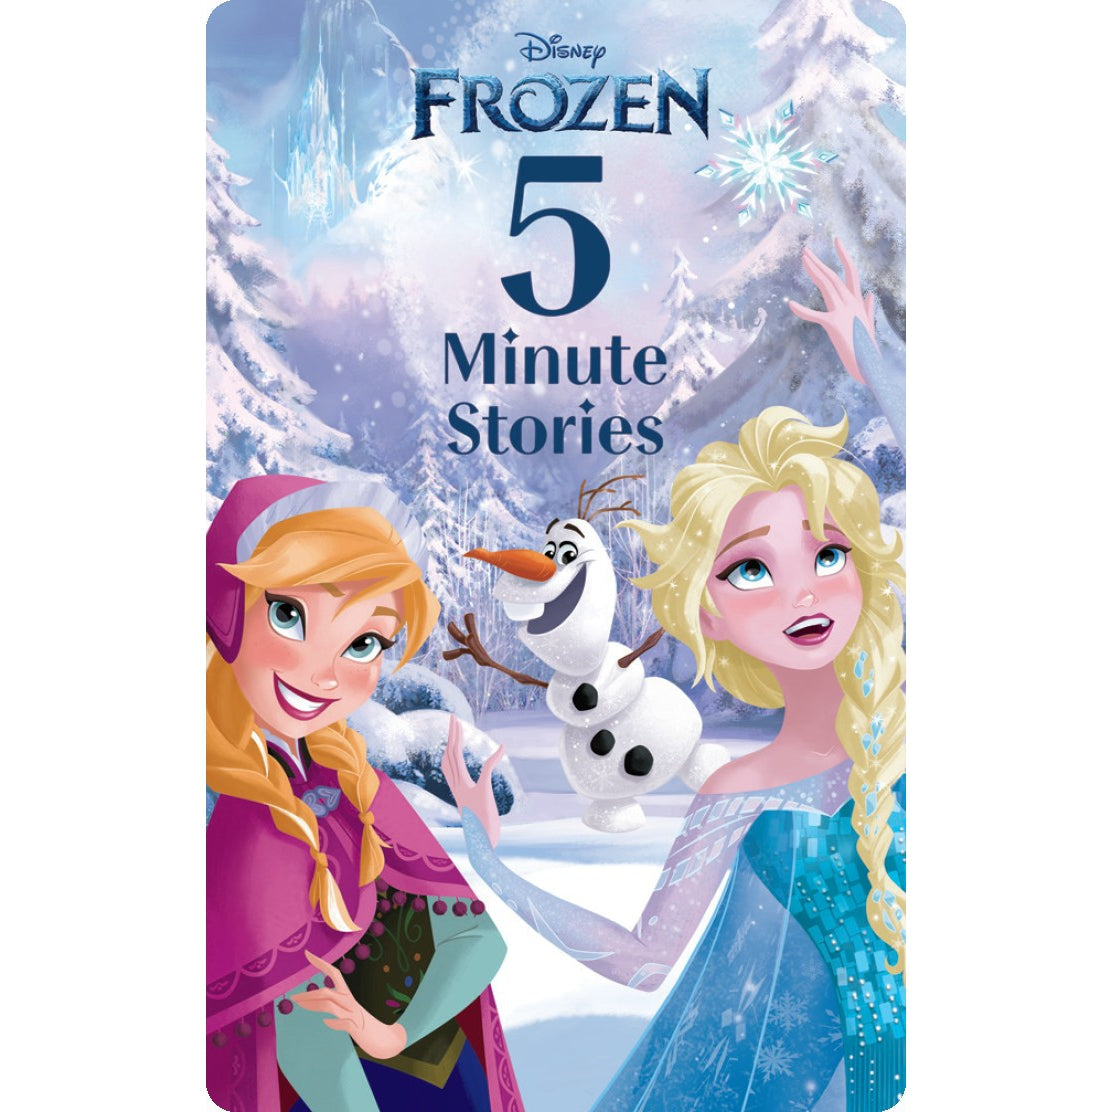 Yoto Card - Disney's 5 Minute Frozen Stories - Child Friendly Audio Story Card for the Yoto Player